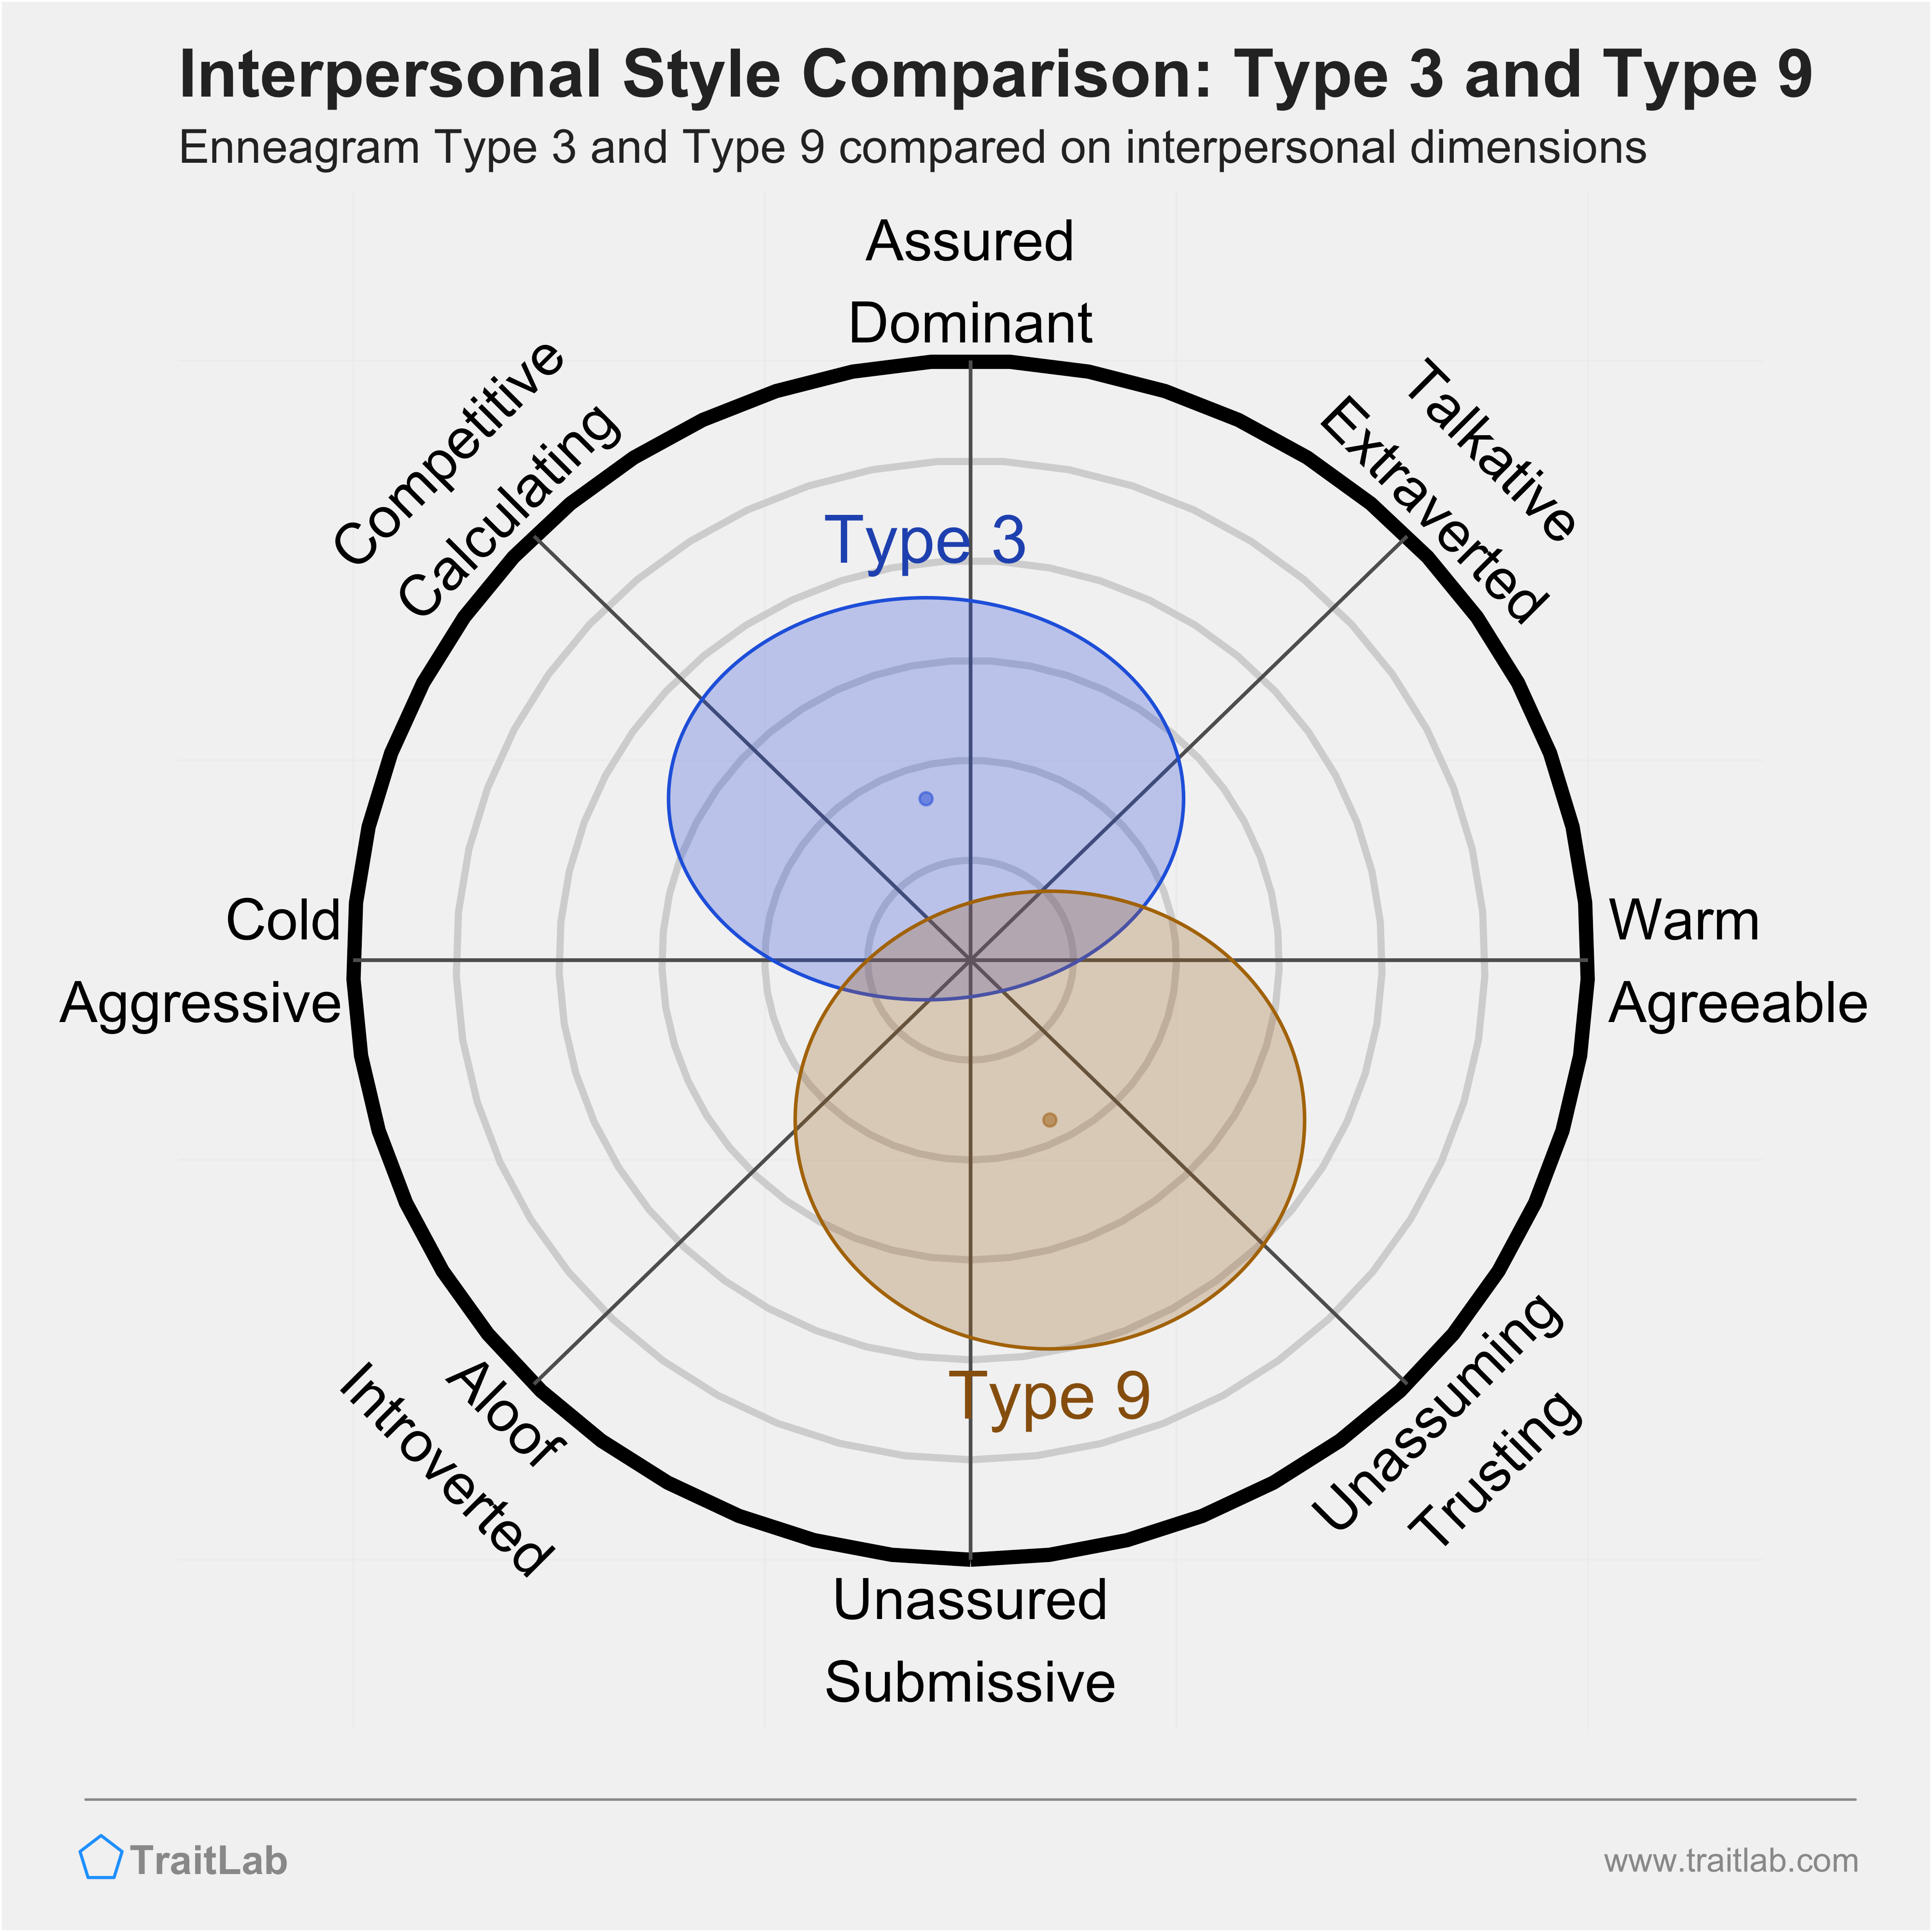 Enneagram Type 3 and Type 9 comparison across interpersonal dimensions